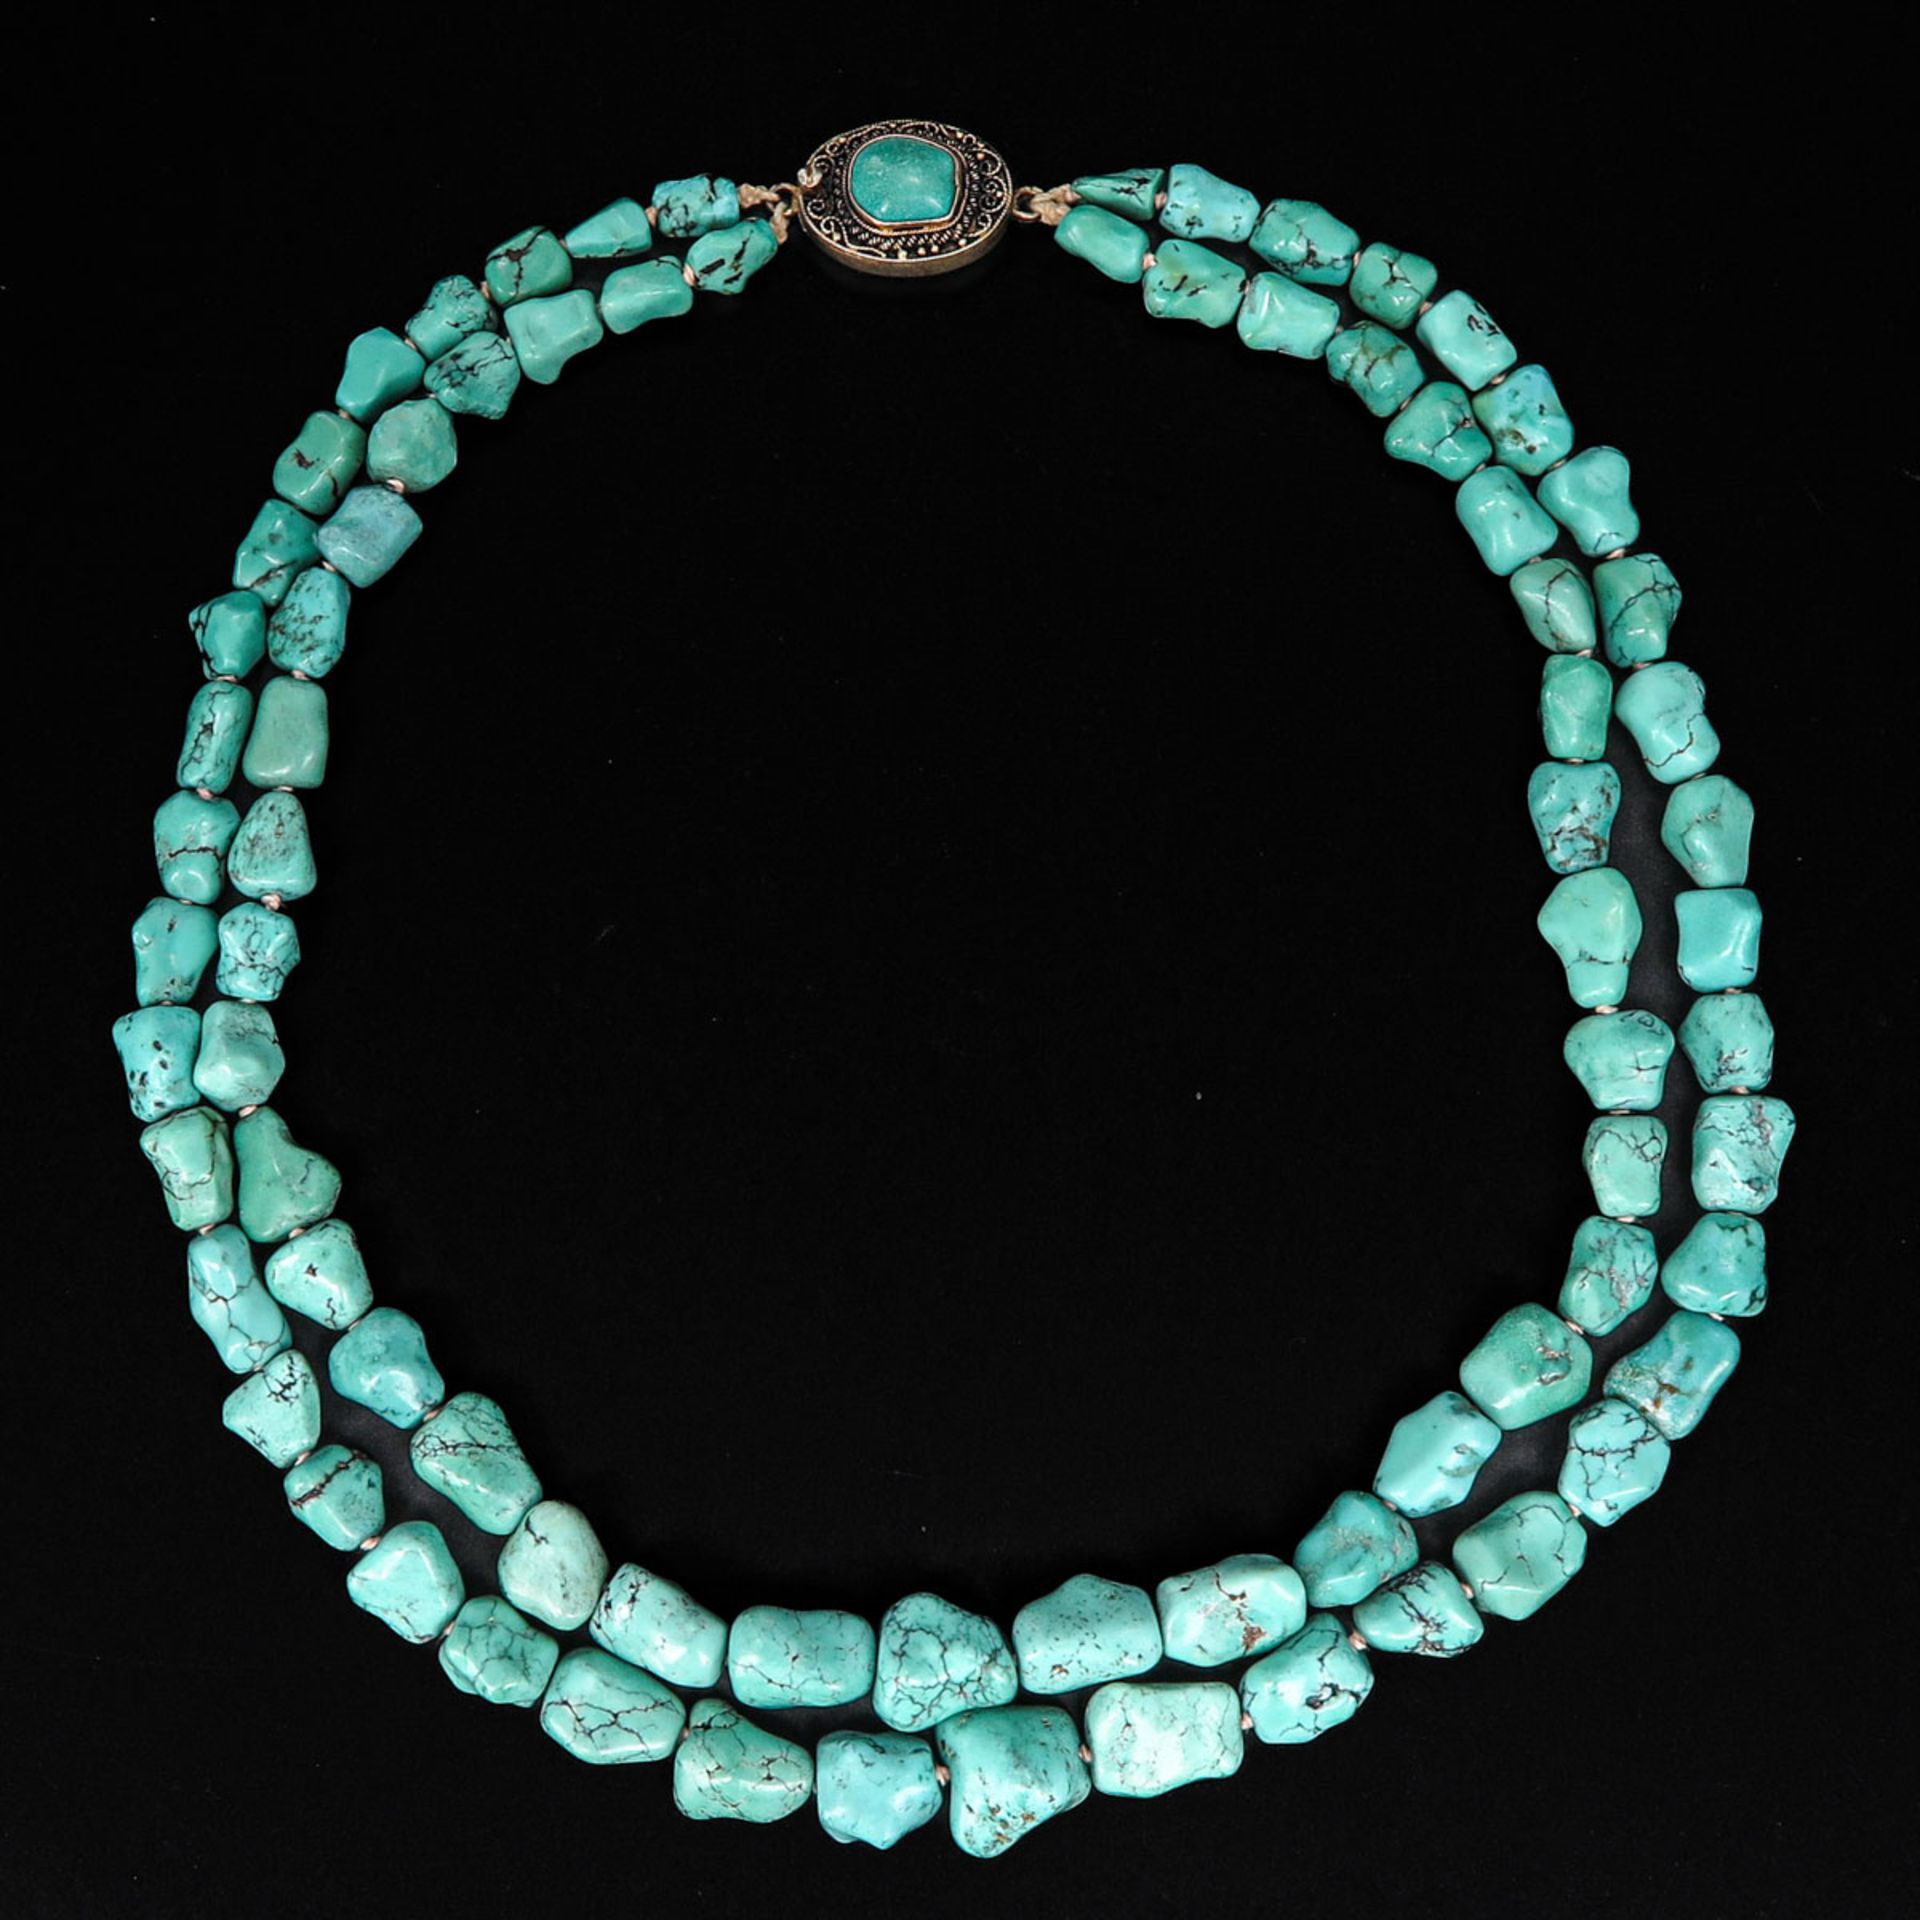 A Turquoise Necklace and Ring along with a Garnet Necklace and Ring - Image 2 of 7